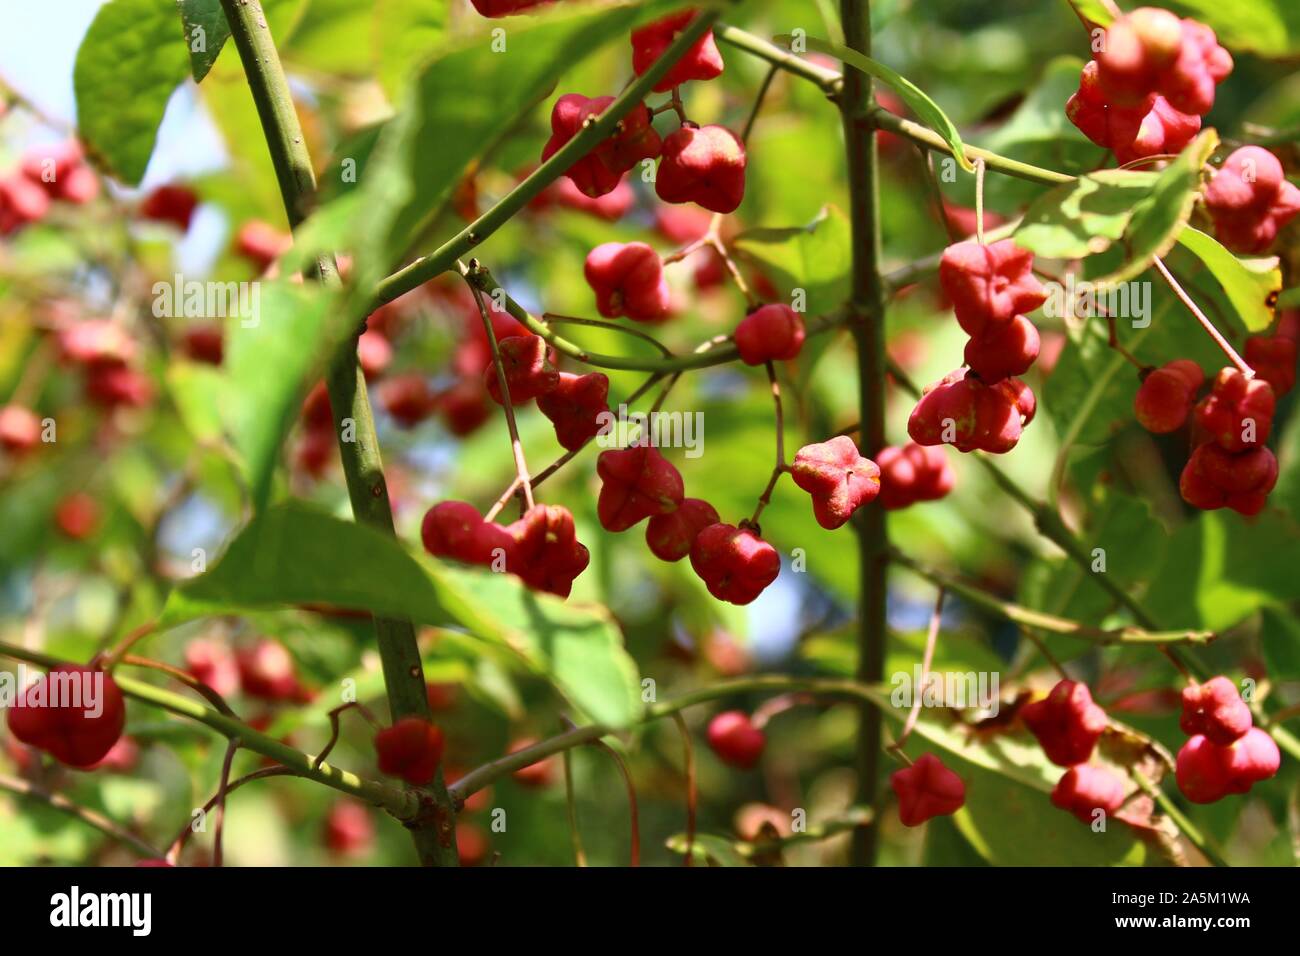 The picture shows a spindle tree in the forest Stock Photo